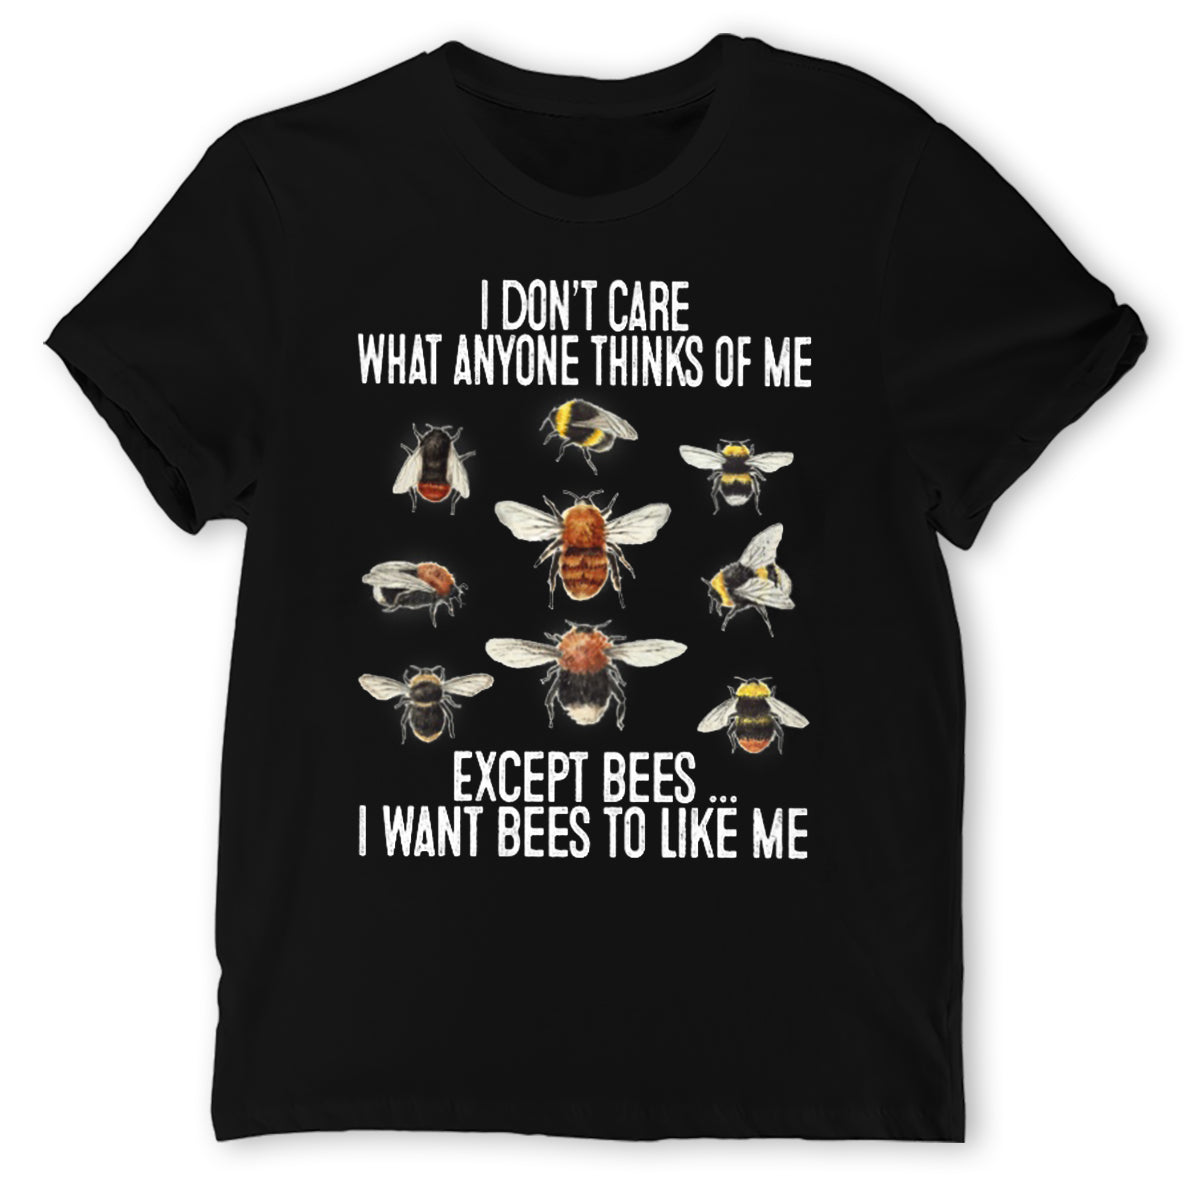 I Don’T Care What Anyone Thinks Of Me Except Bees I Want Bees To Like Me Shirt, Bee Shirt, Bee Farm Shirt, T-Shirt, Tee